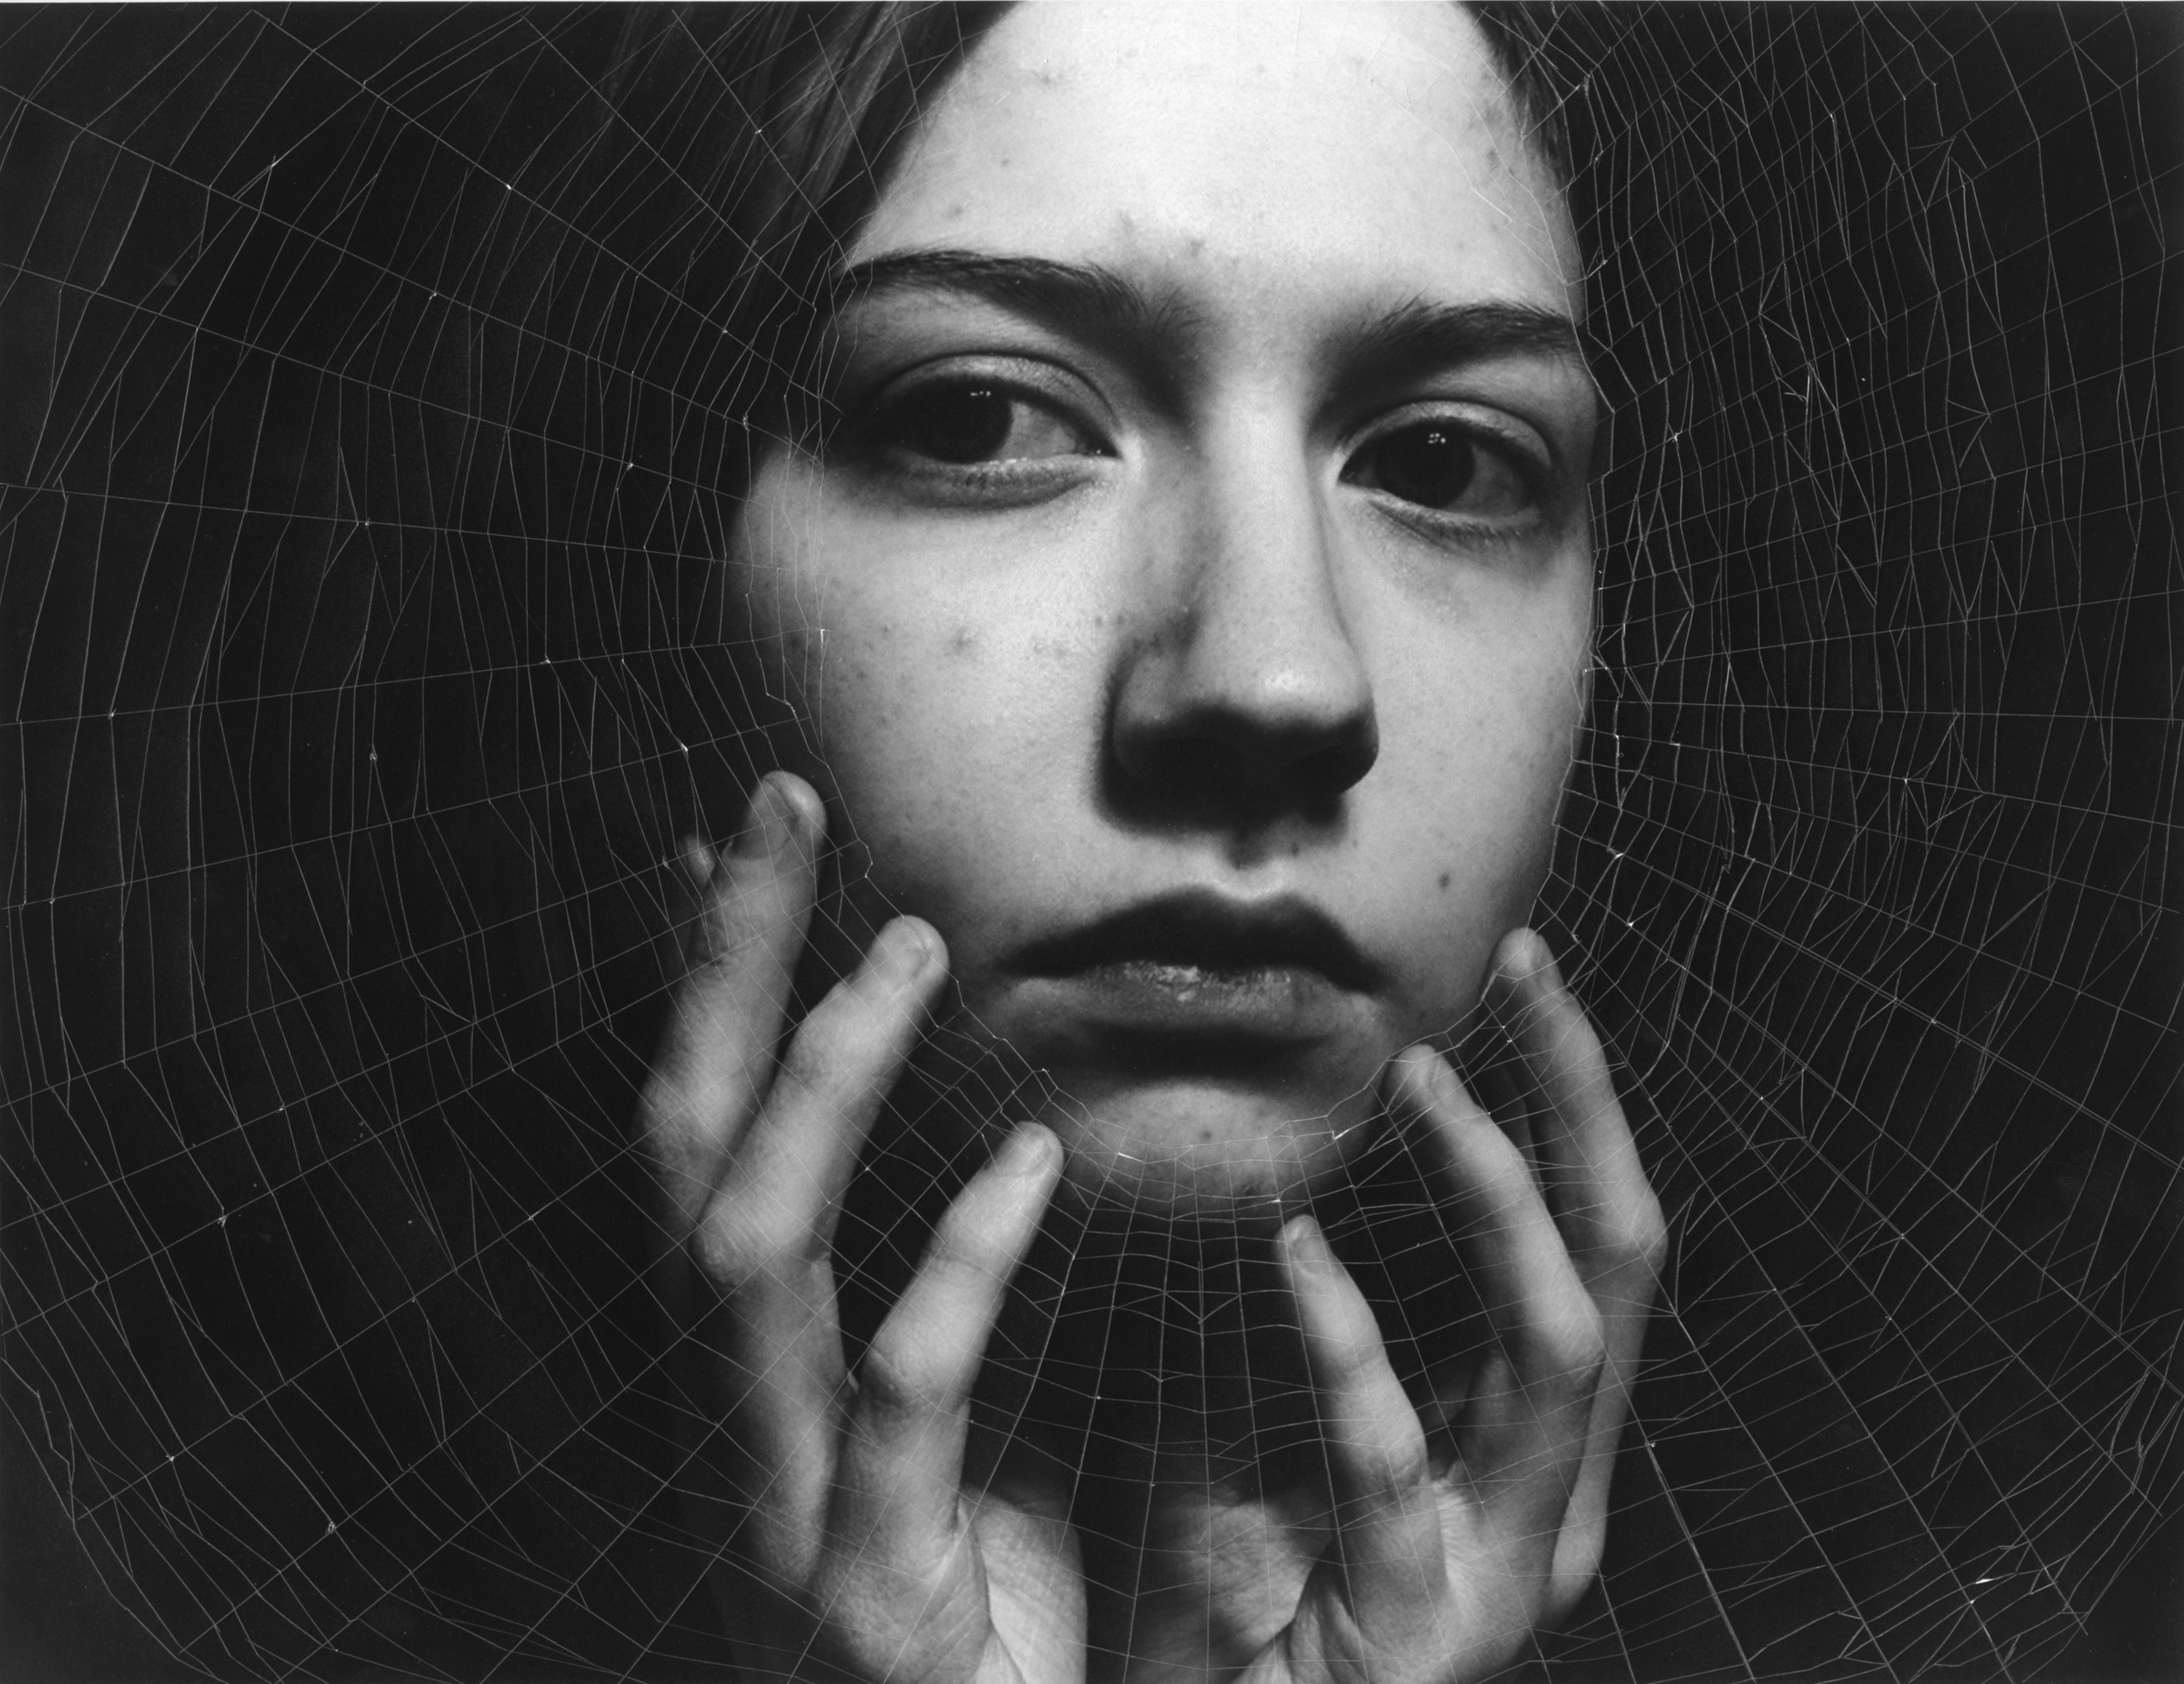 Black and white gelatin silver print of a woman looking out at the camera with her hands resting on her face, overlaid by a cutout of a spider's web.